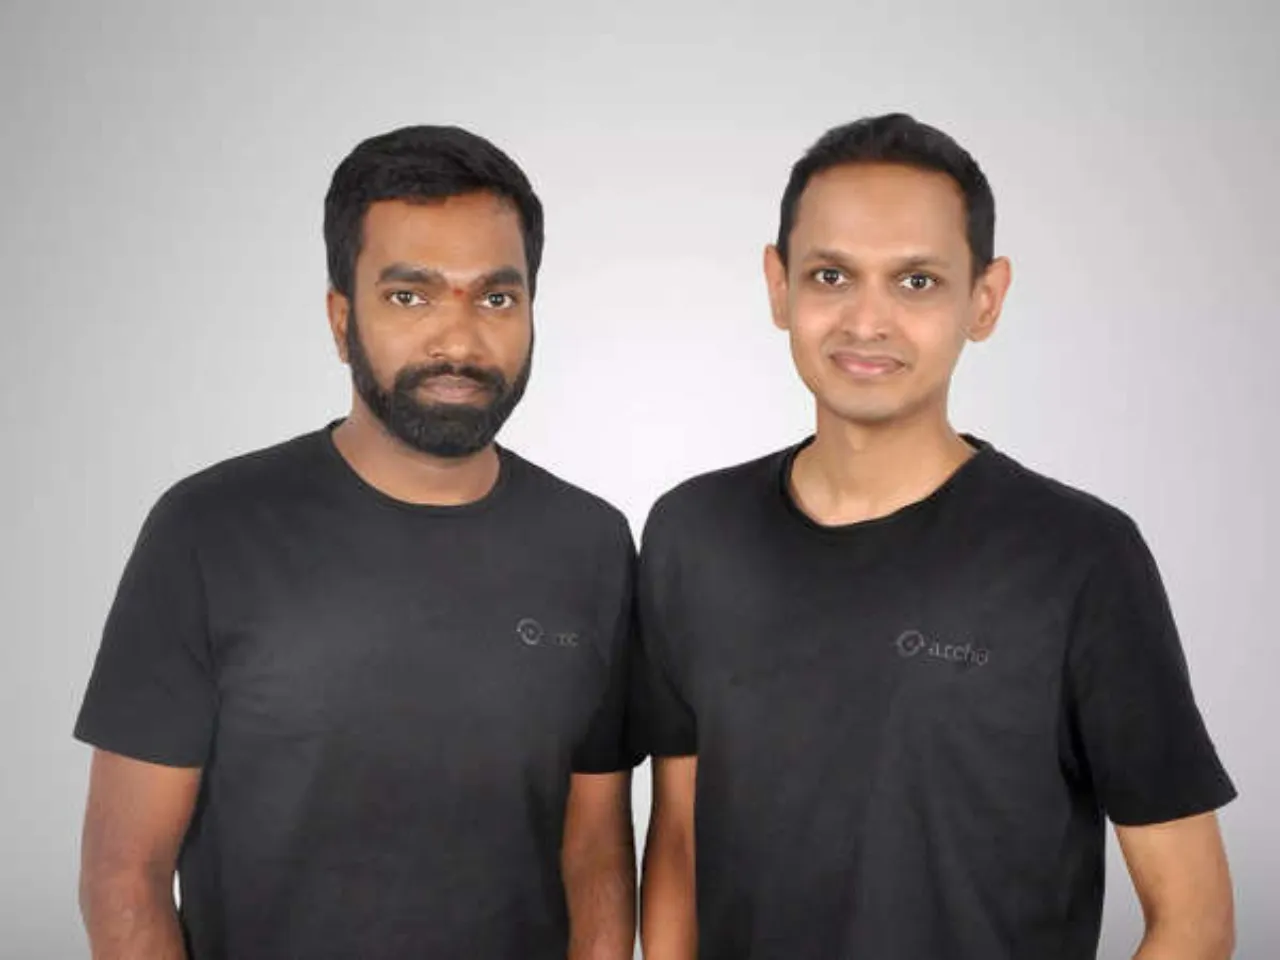 Cloud security startup Arch0 raises $1.25M in a pre-Seed round led by Leo Capital